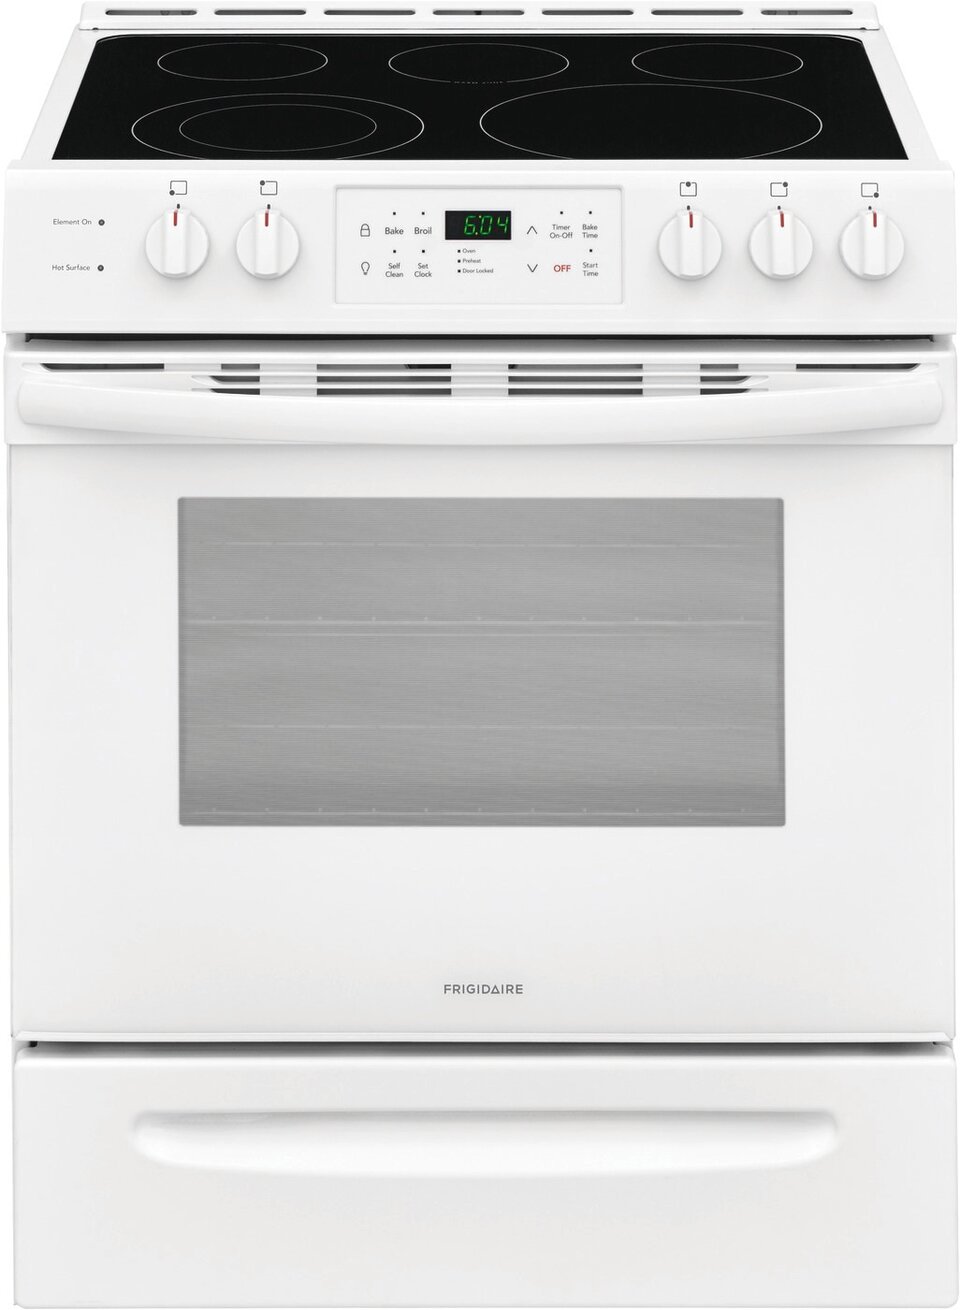 Frigidaire 30'' Front Control Freestanding Electric Range in White